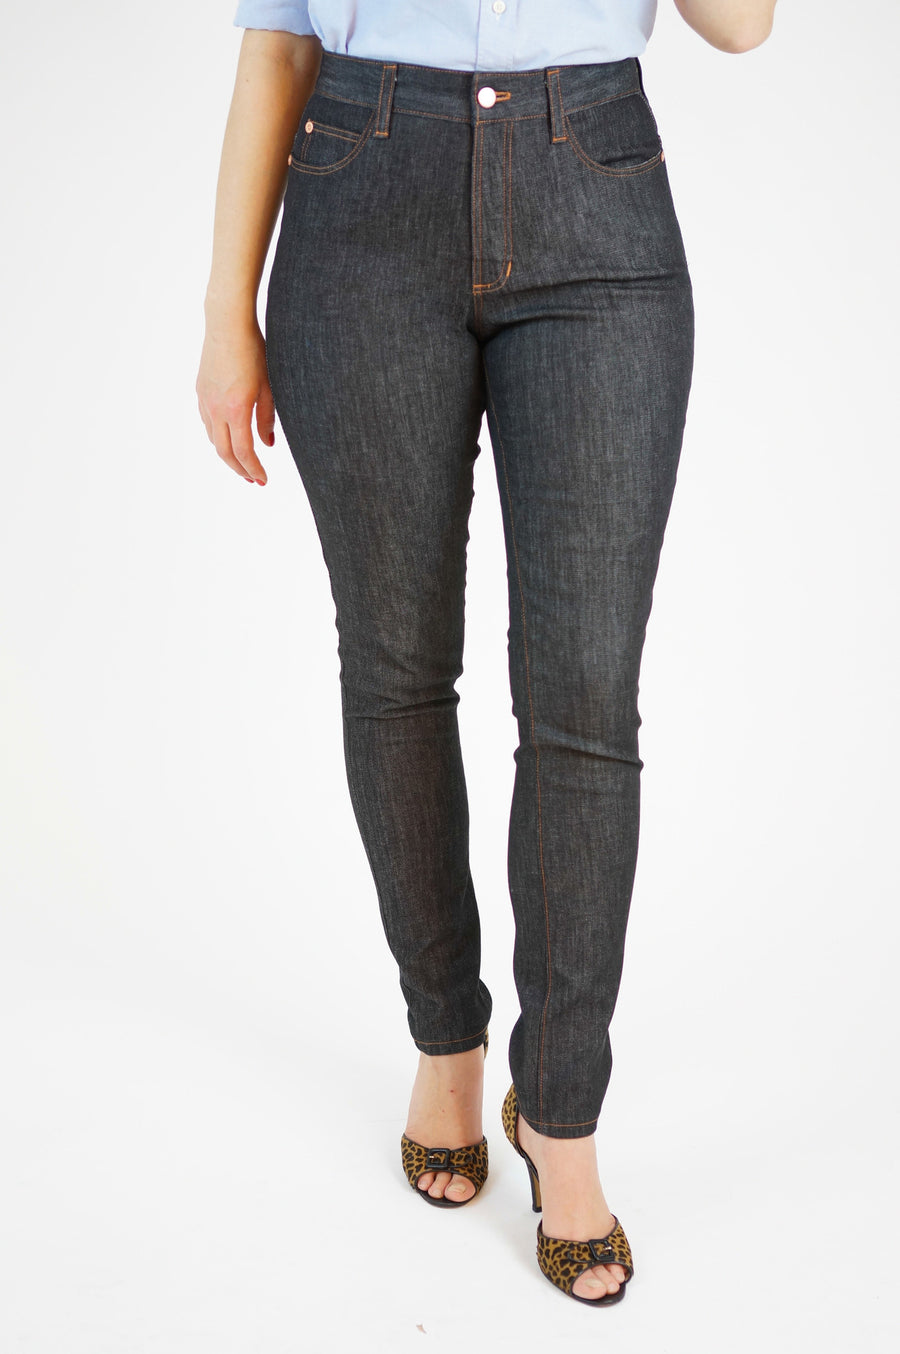 Ginger Jeans pattern // Skinny jeans sewing pattern